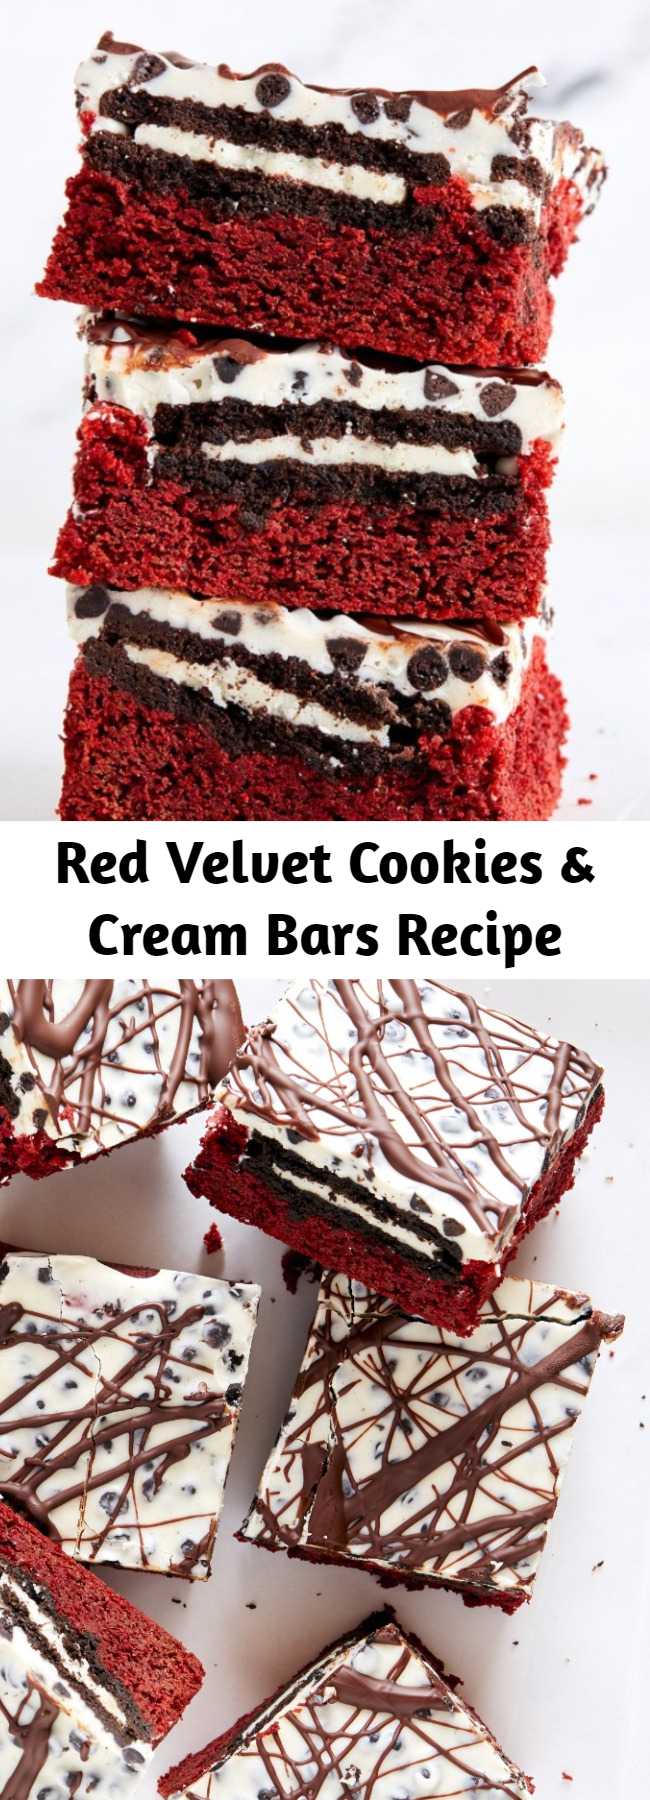 Red Velvet Cookies & Cream Bars Recipe - You can turn red velvet cake mix into decadent brownies with this recipe. For the cookies & cream lovers in your life, these bars are the ultimate.